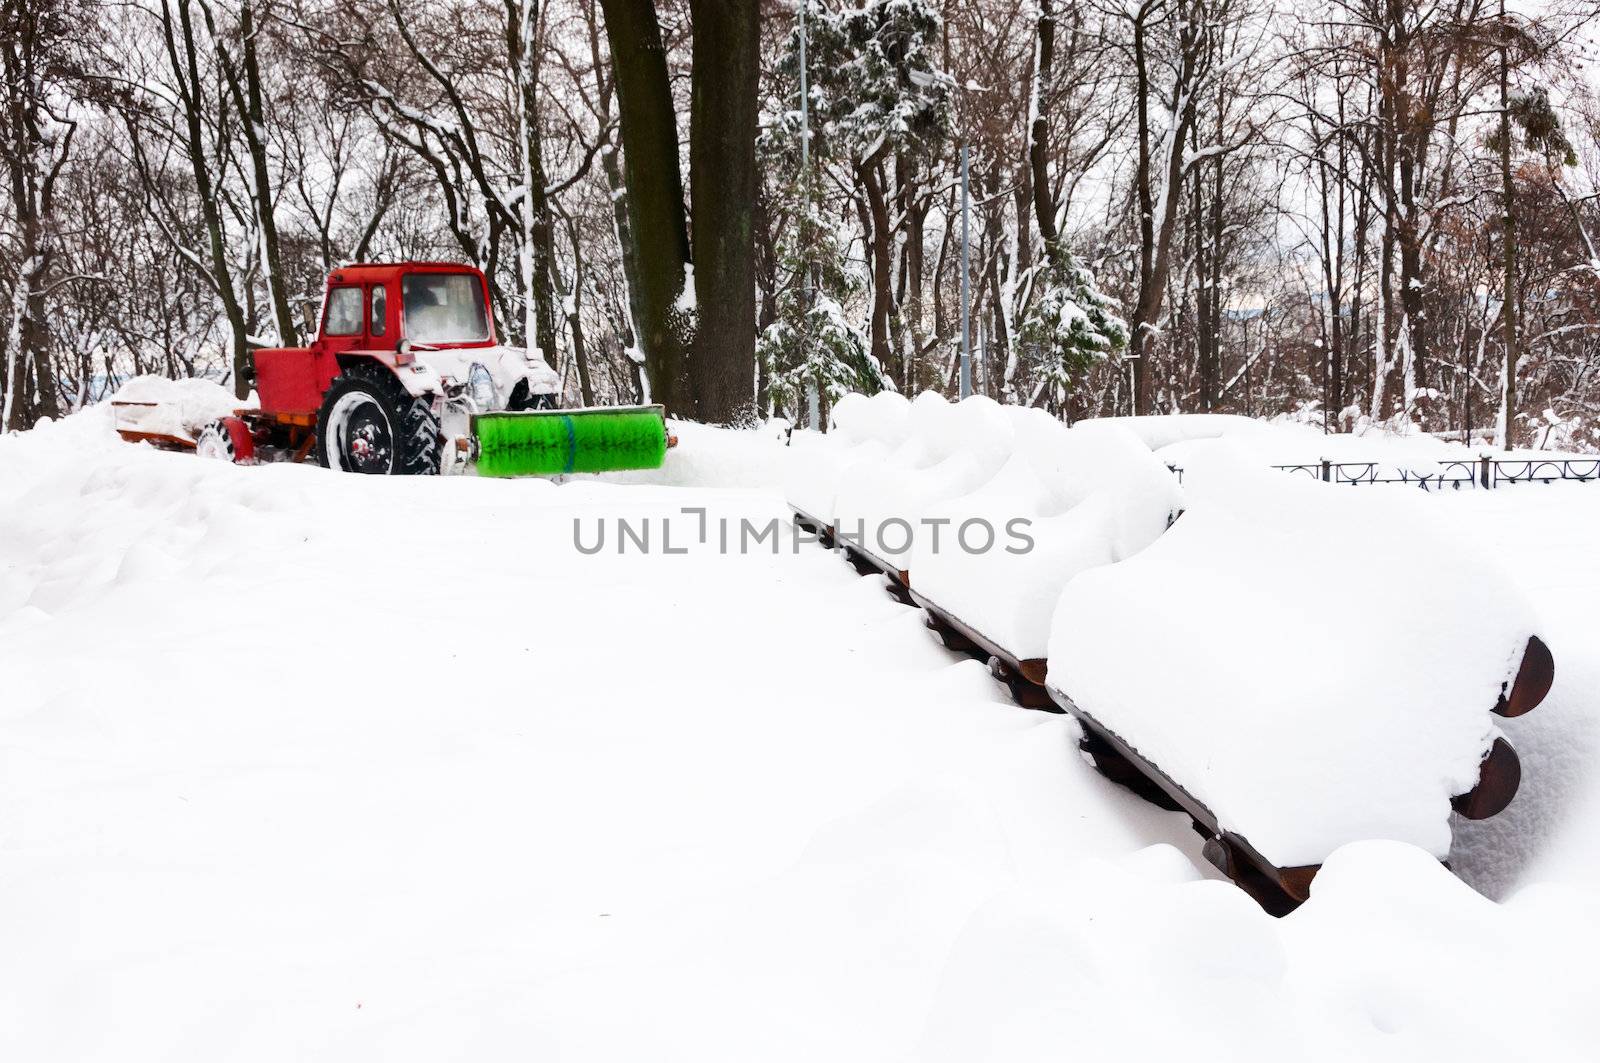 Red tractor cleaning park after snowfall by iryna_rasko